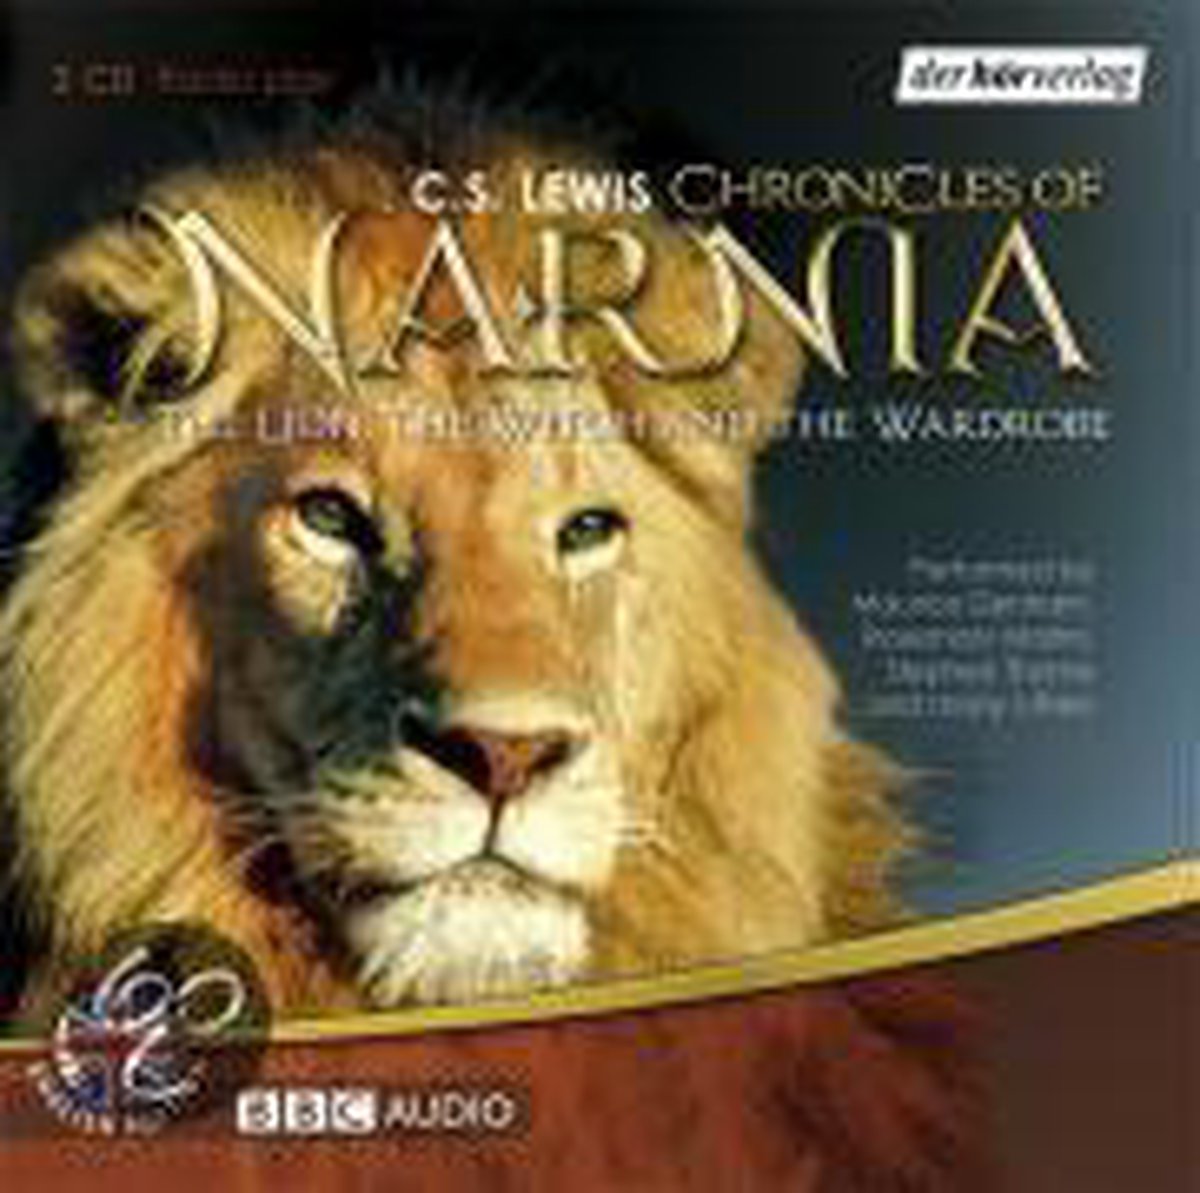 The Chronicles of Narnia 1. 2 CDs - Clive Staples Lewis